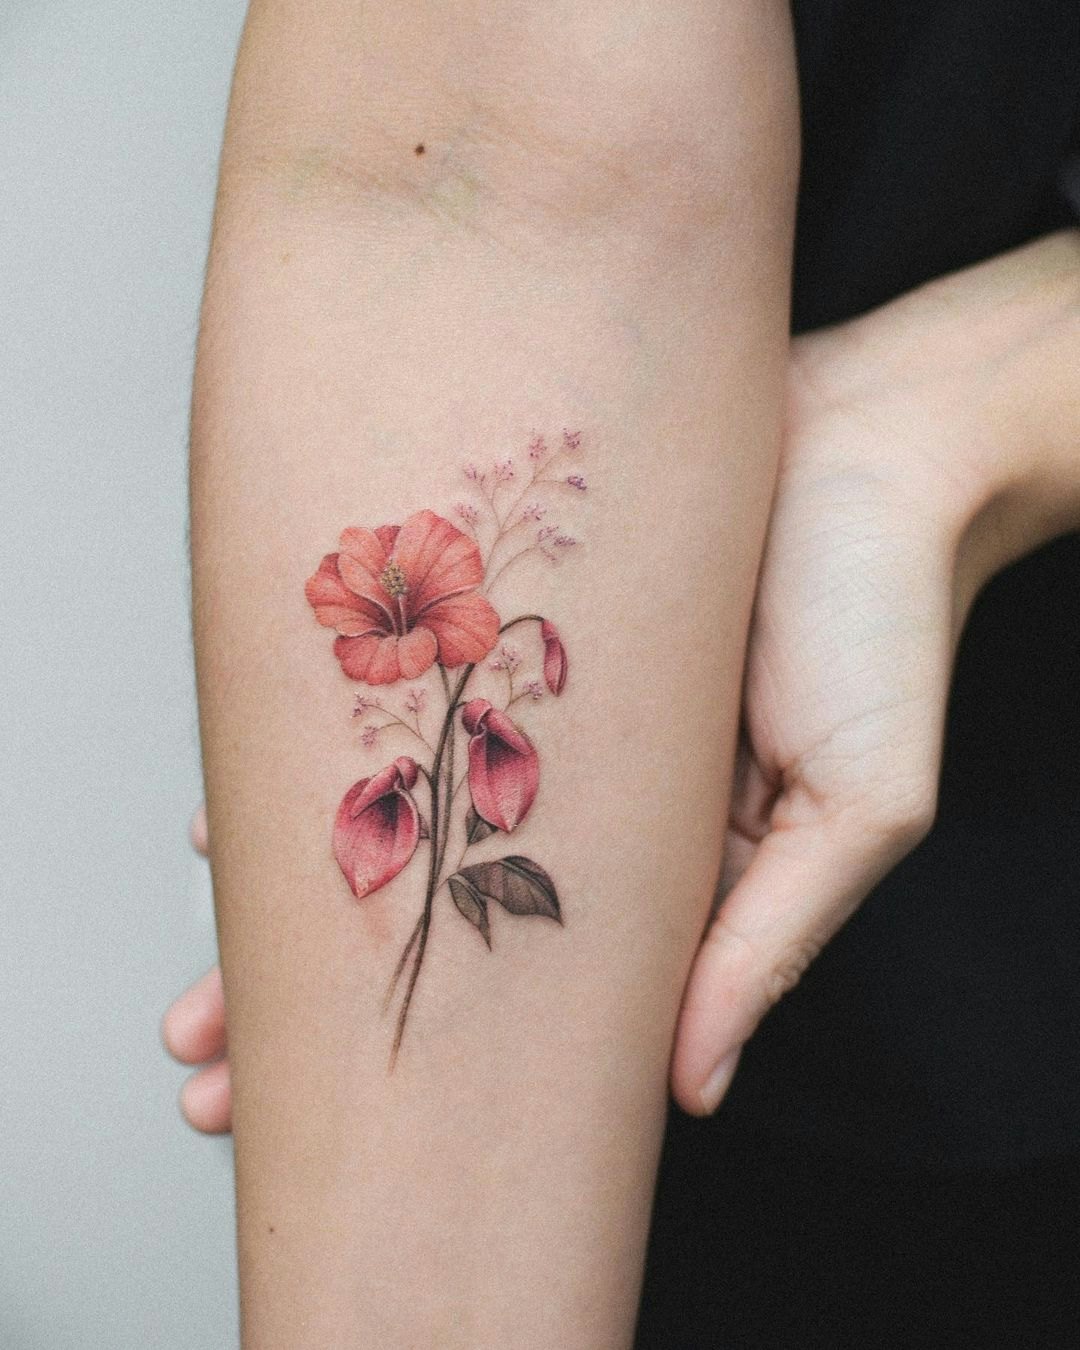 59 Tropical Flower Tattoos Stock Photos HighRes Pictures and Images   Getty Images